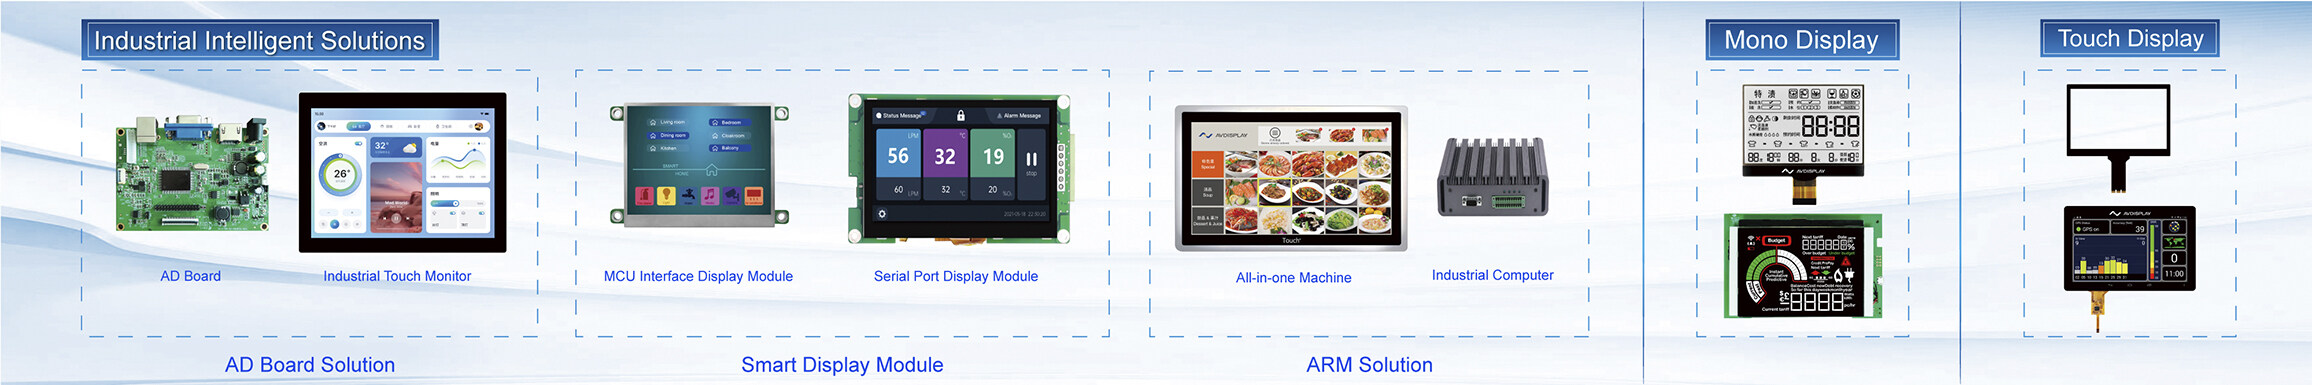 ips lcd panel manufacturers, touch panel display manufacturers, touch screen display factories